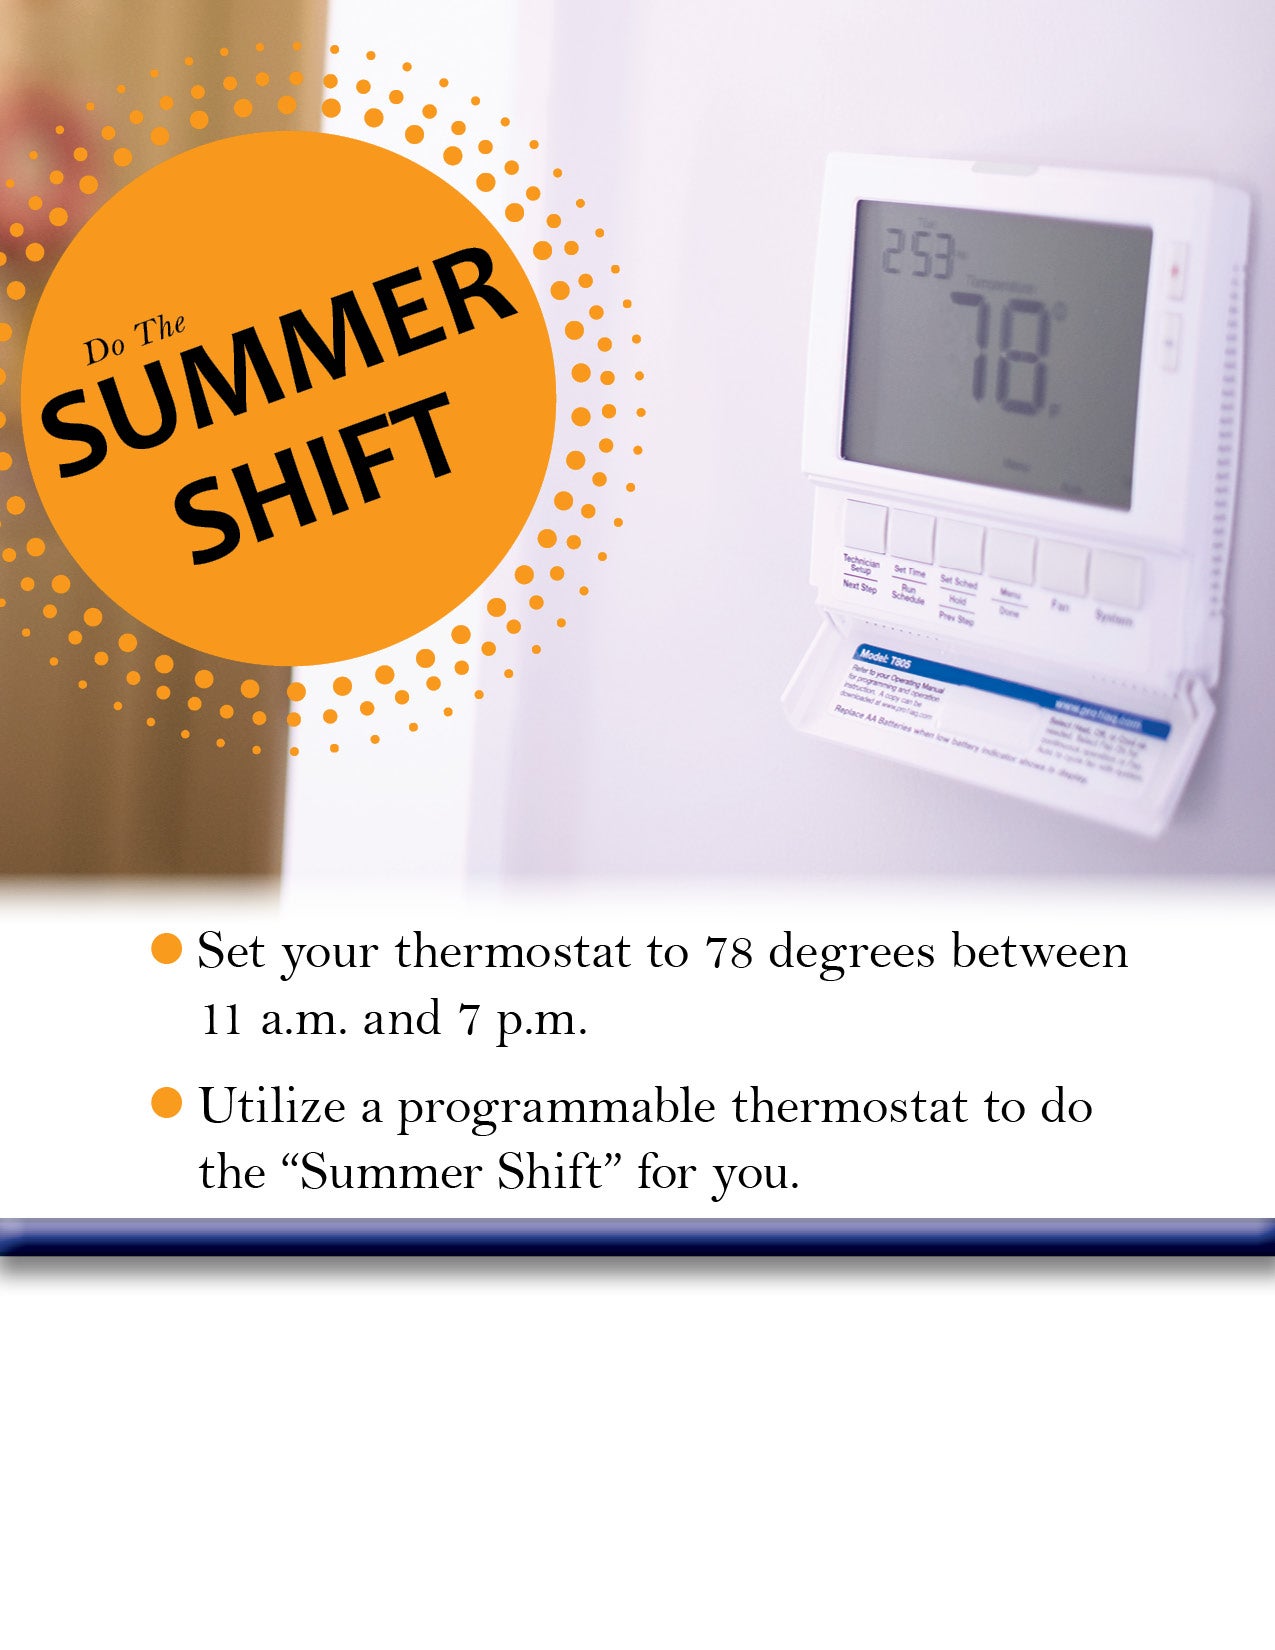 Do the Summer Shift, Raise Thermostat 4 Degrees in Summer